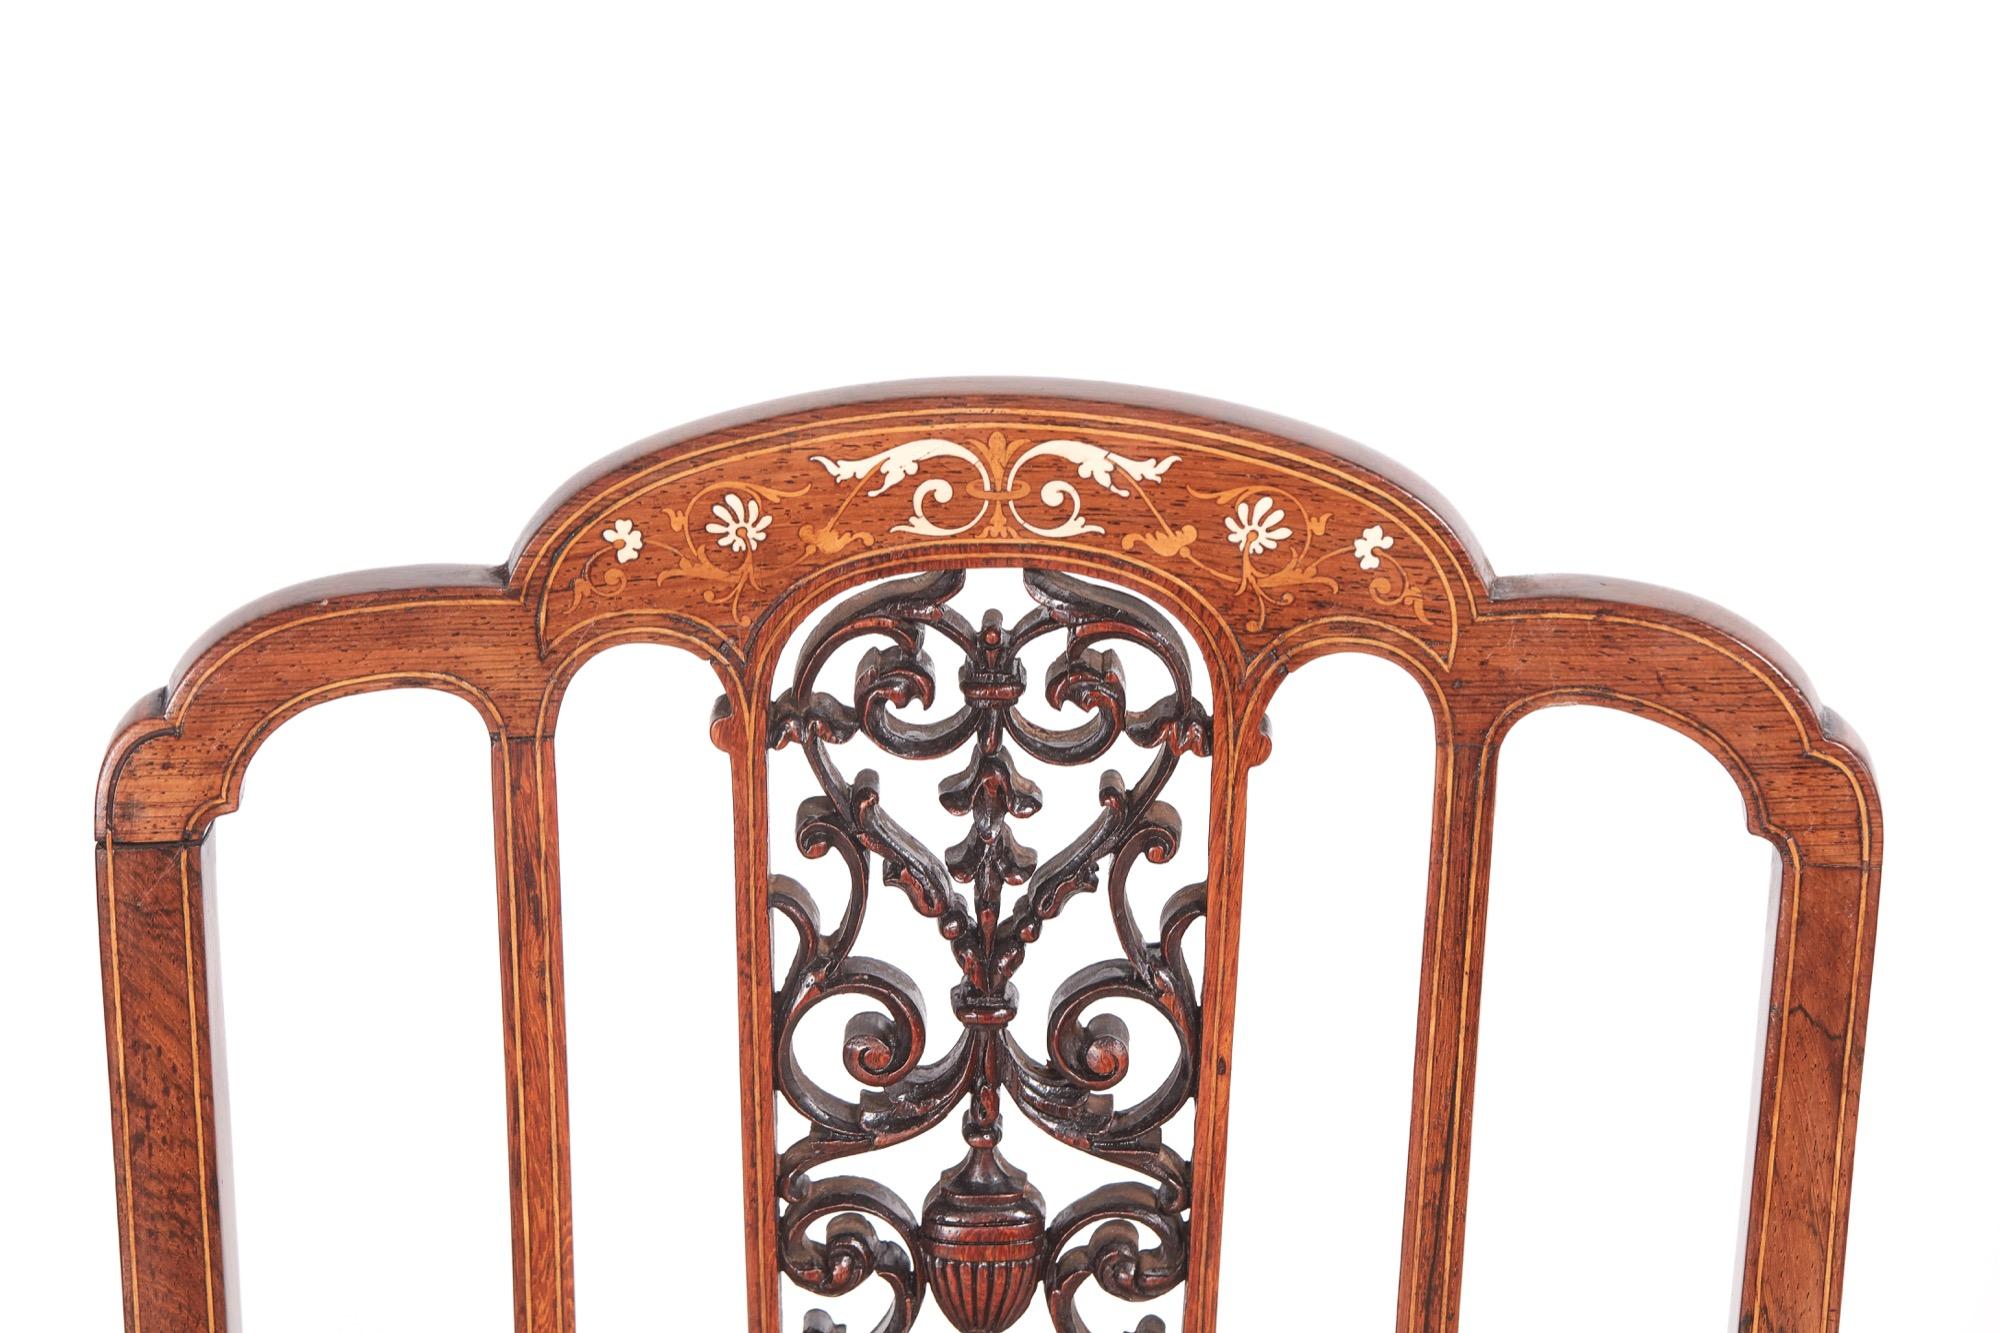 Outstanding quality pair of Edwardian inlaid hardwood side chairs with a stunning inlaid shaped top rail, beautiful carved centre splat, standing on square tapering legs with spade feet to the front and outswept back legs. Newly re-covered seats